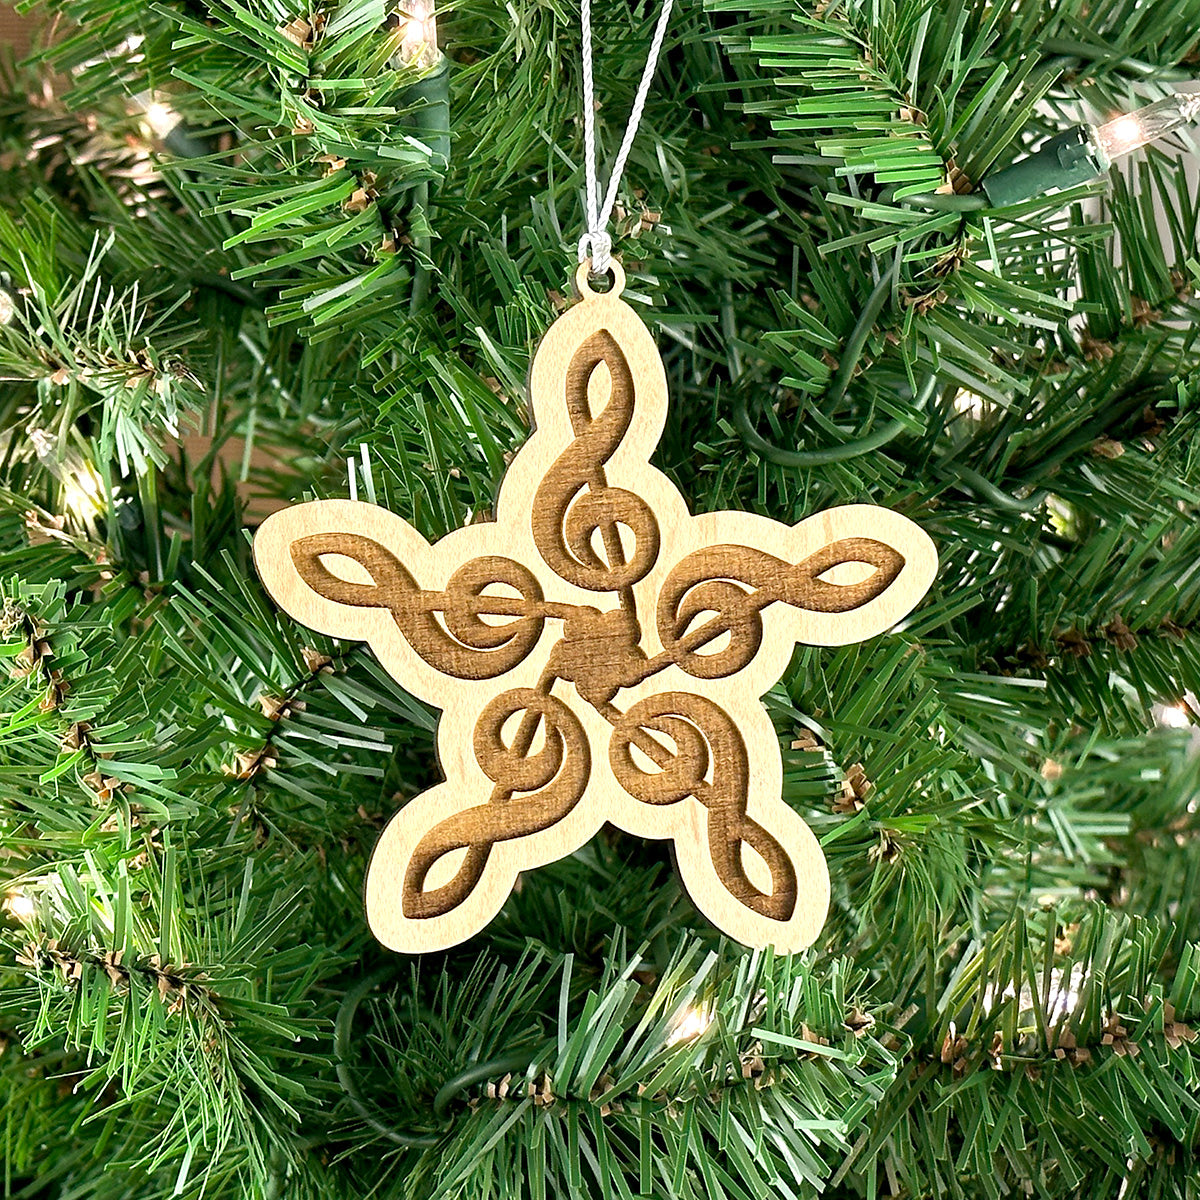 "Note Flakes" #10 Engraved Wood Ornament